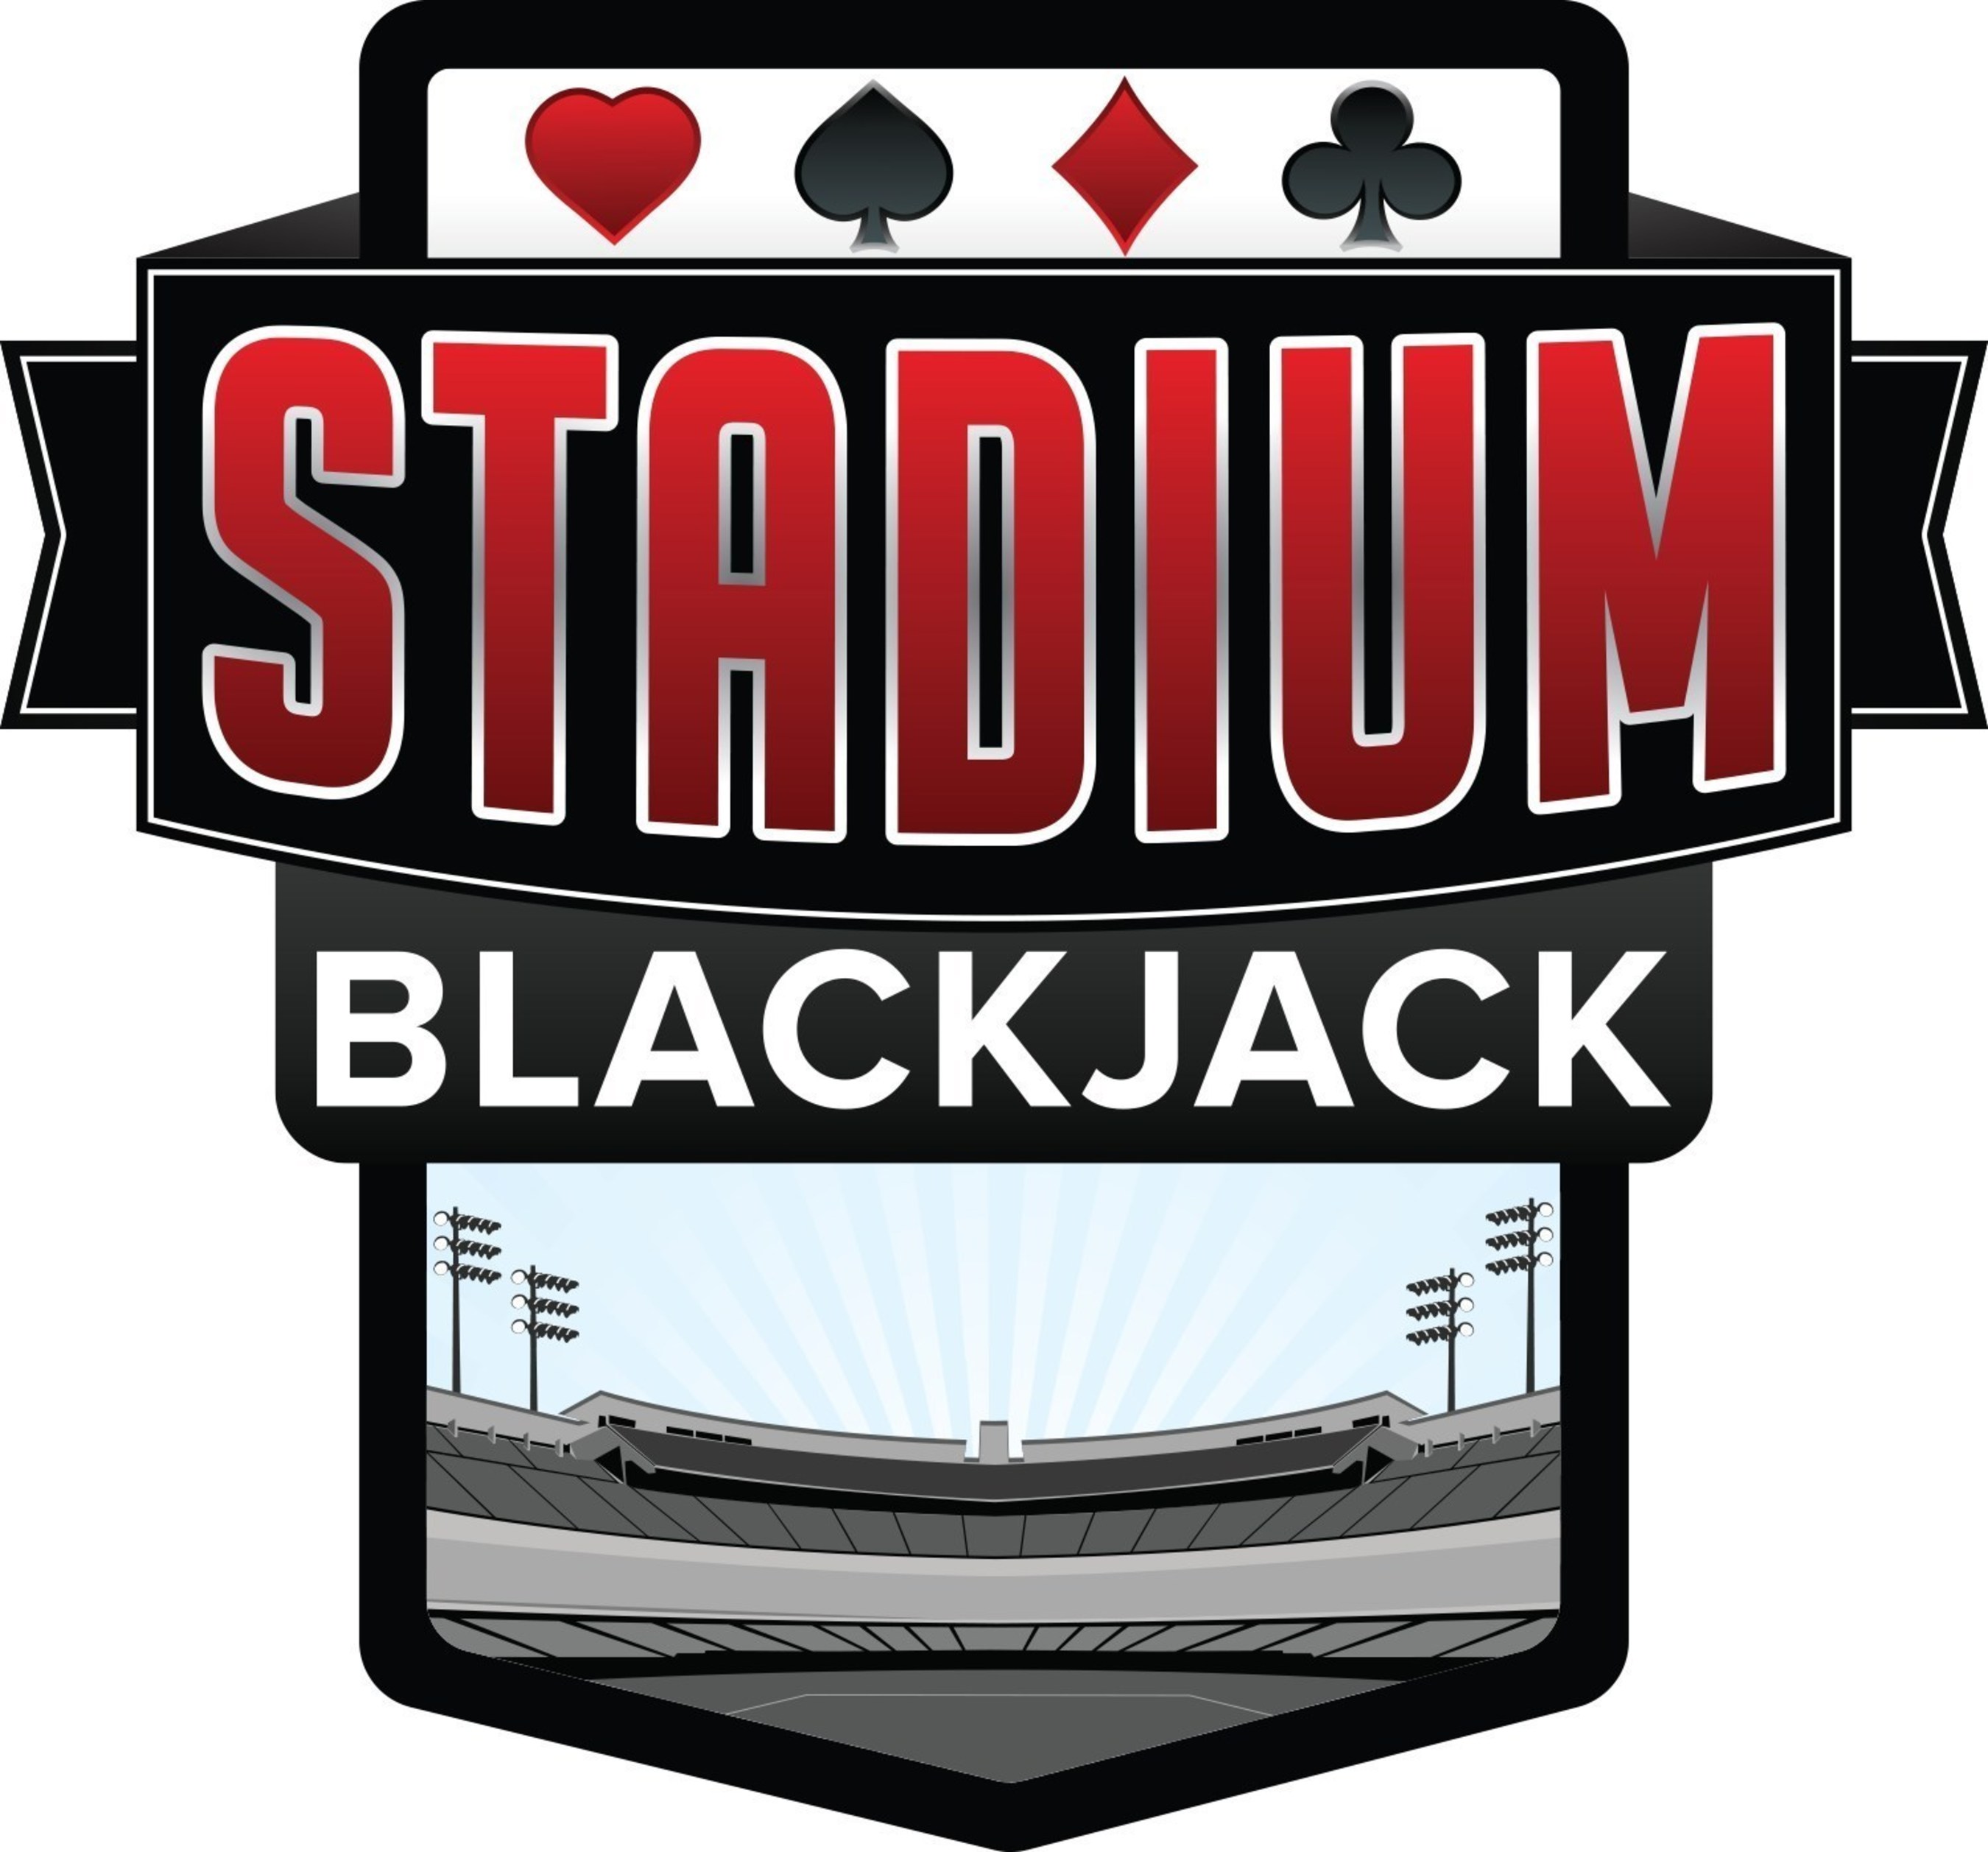 Stadium Blackjack on the Fusion Hybrid increases the player's excitement by allowing them to play multiple tables from one location or seat. The game features shared starting hands for all players, followed by independent decision-making by each player as the hand progresses.